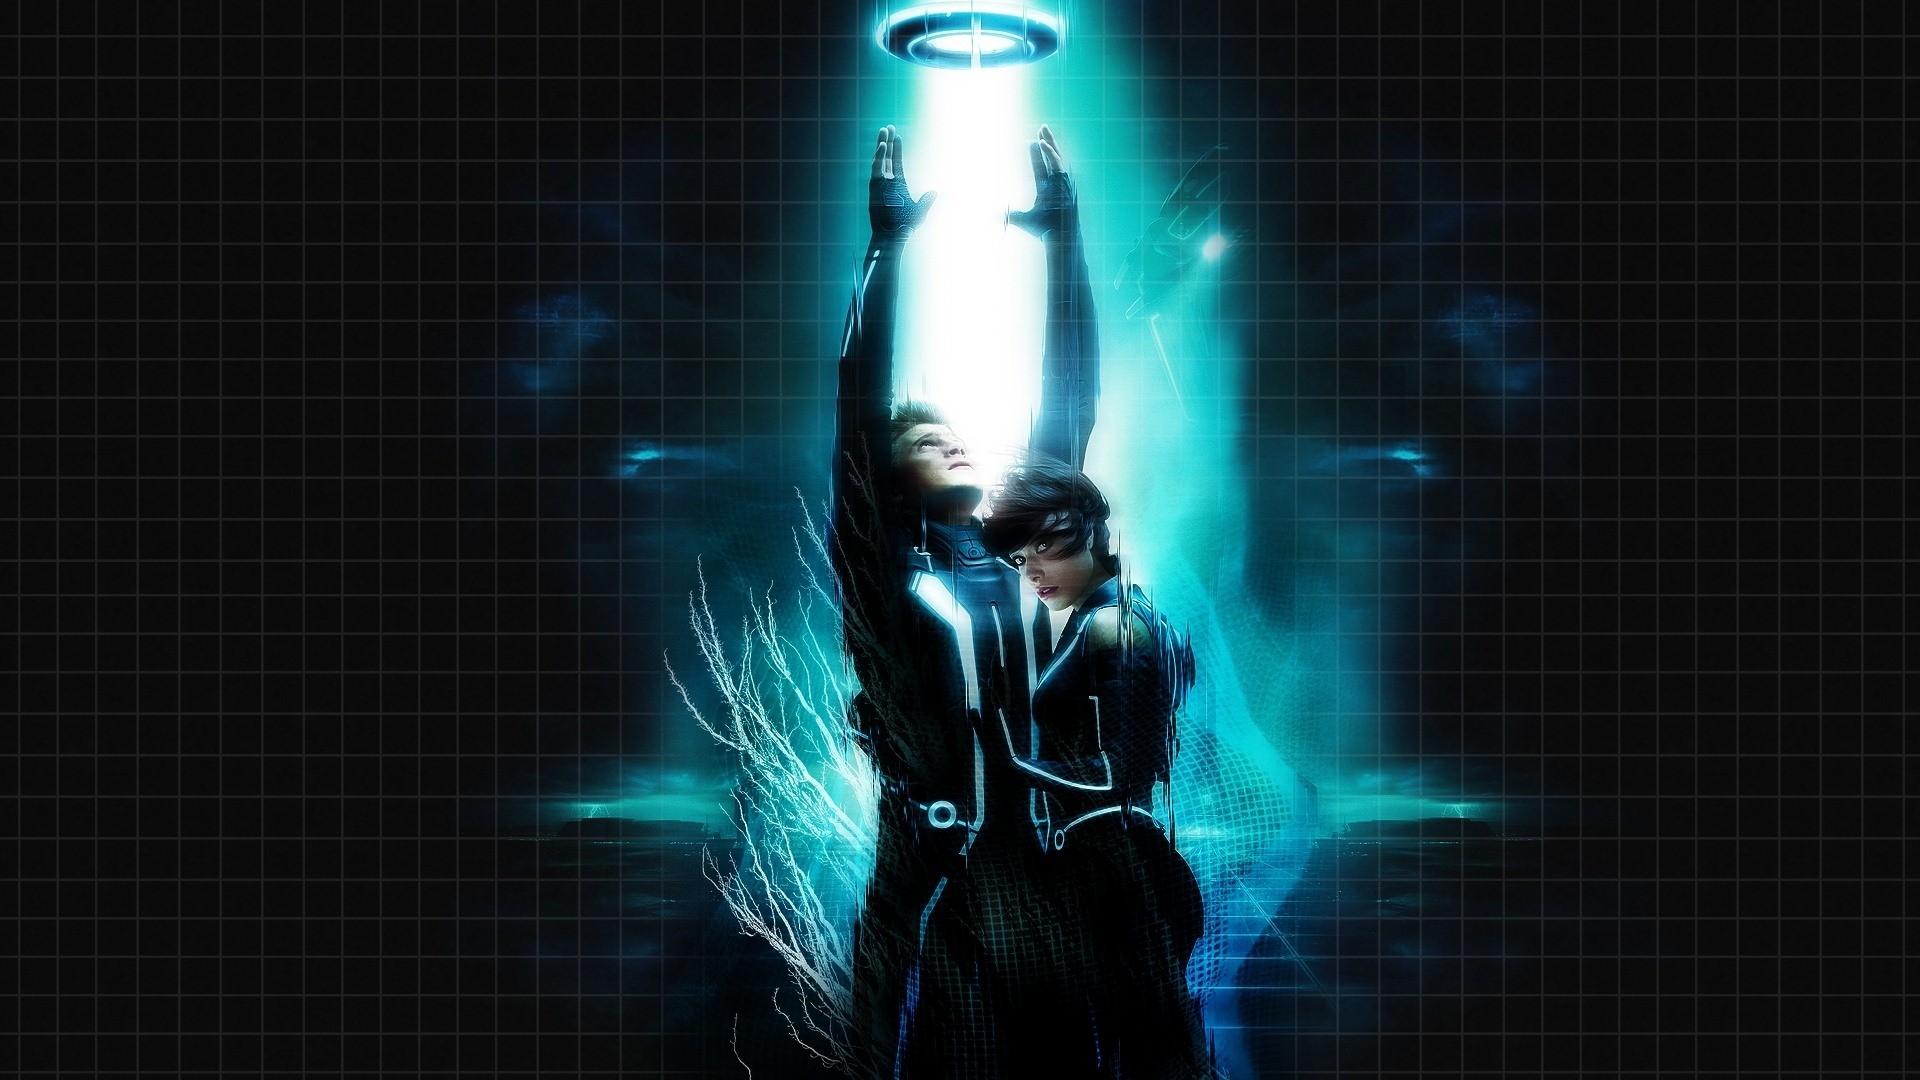 1920x1080 tron legacy wallpapers Â« Awesome Wallpapers 1920Ã1080 Tron Legacy  Backgrounds (42 Wallpapers)